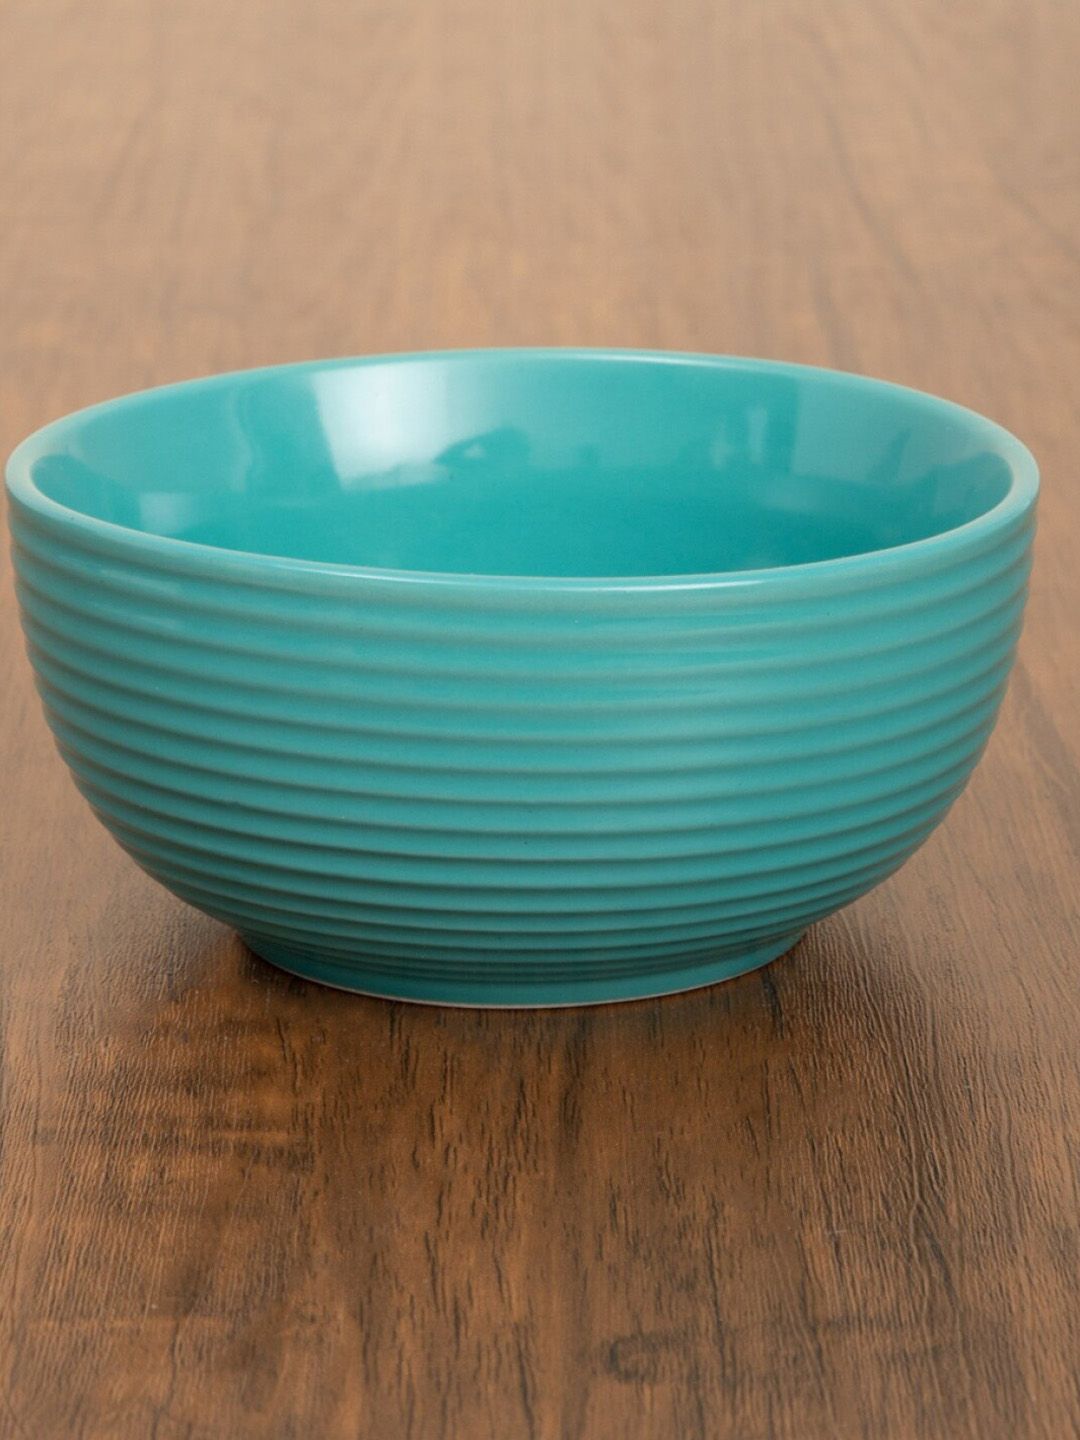 Home Centre Turquoise Blue Striped Curry Serving Bowl Price in India